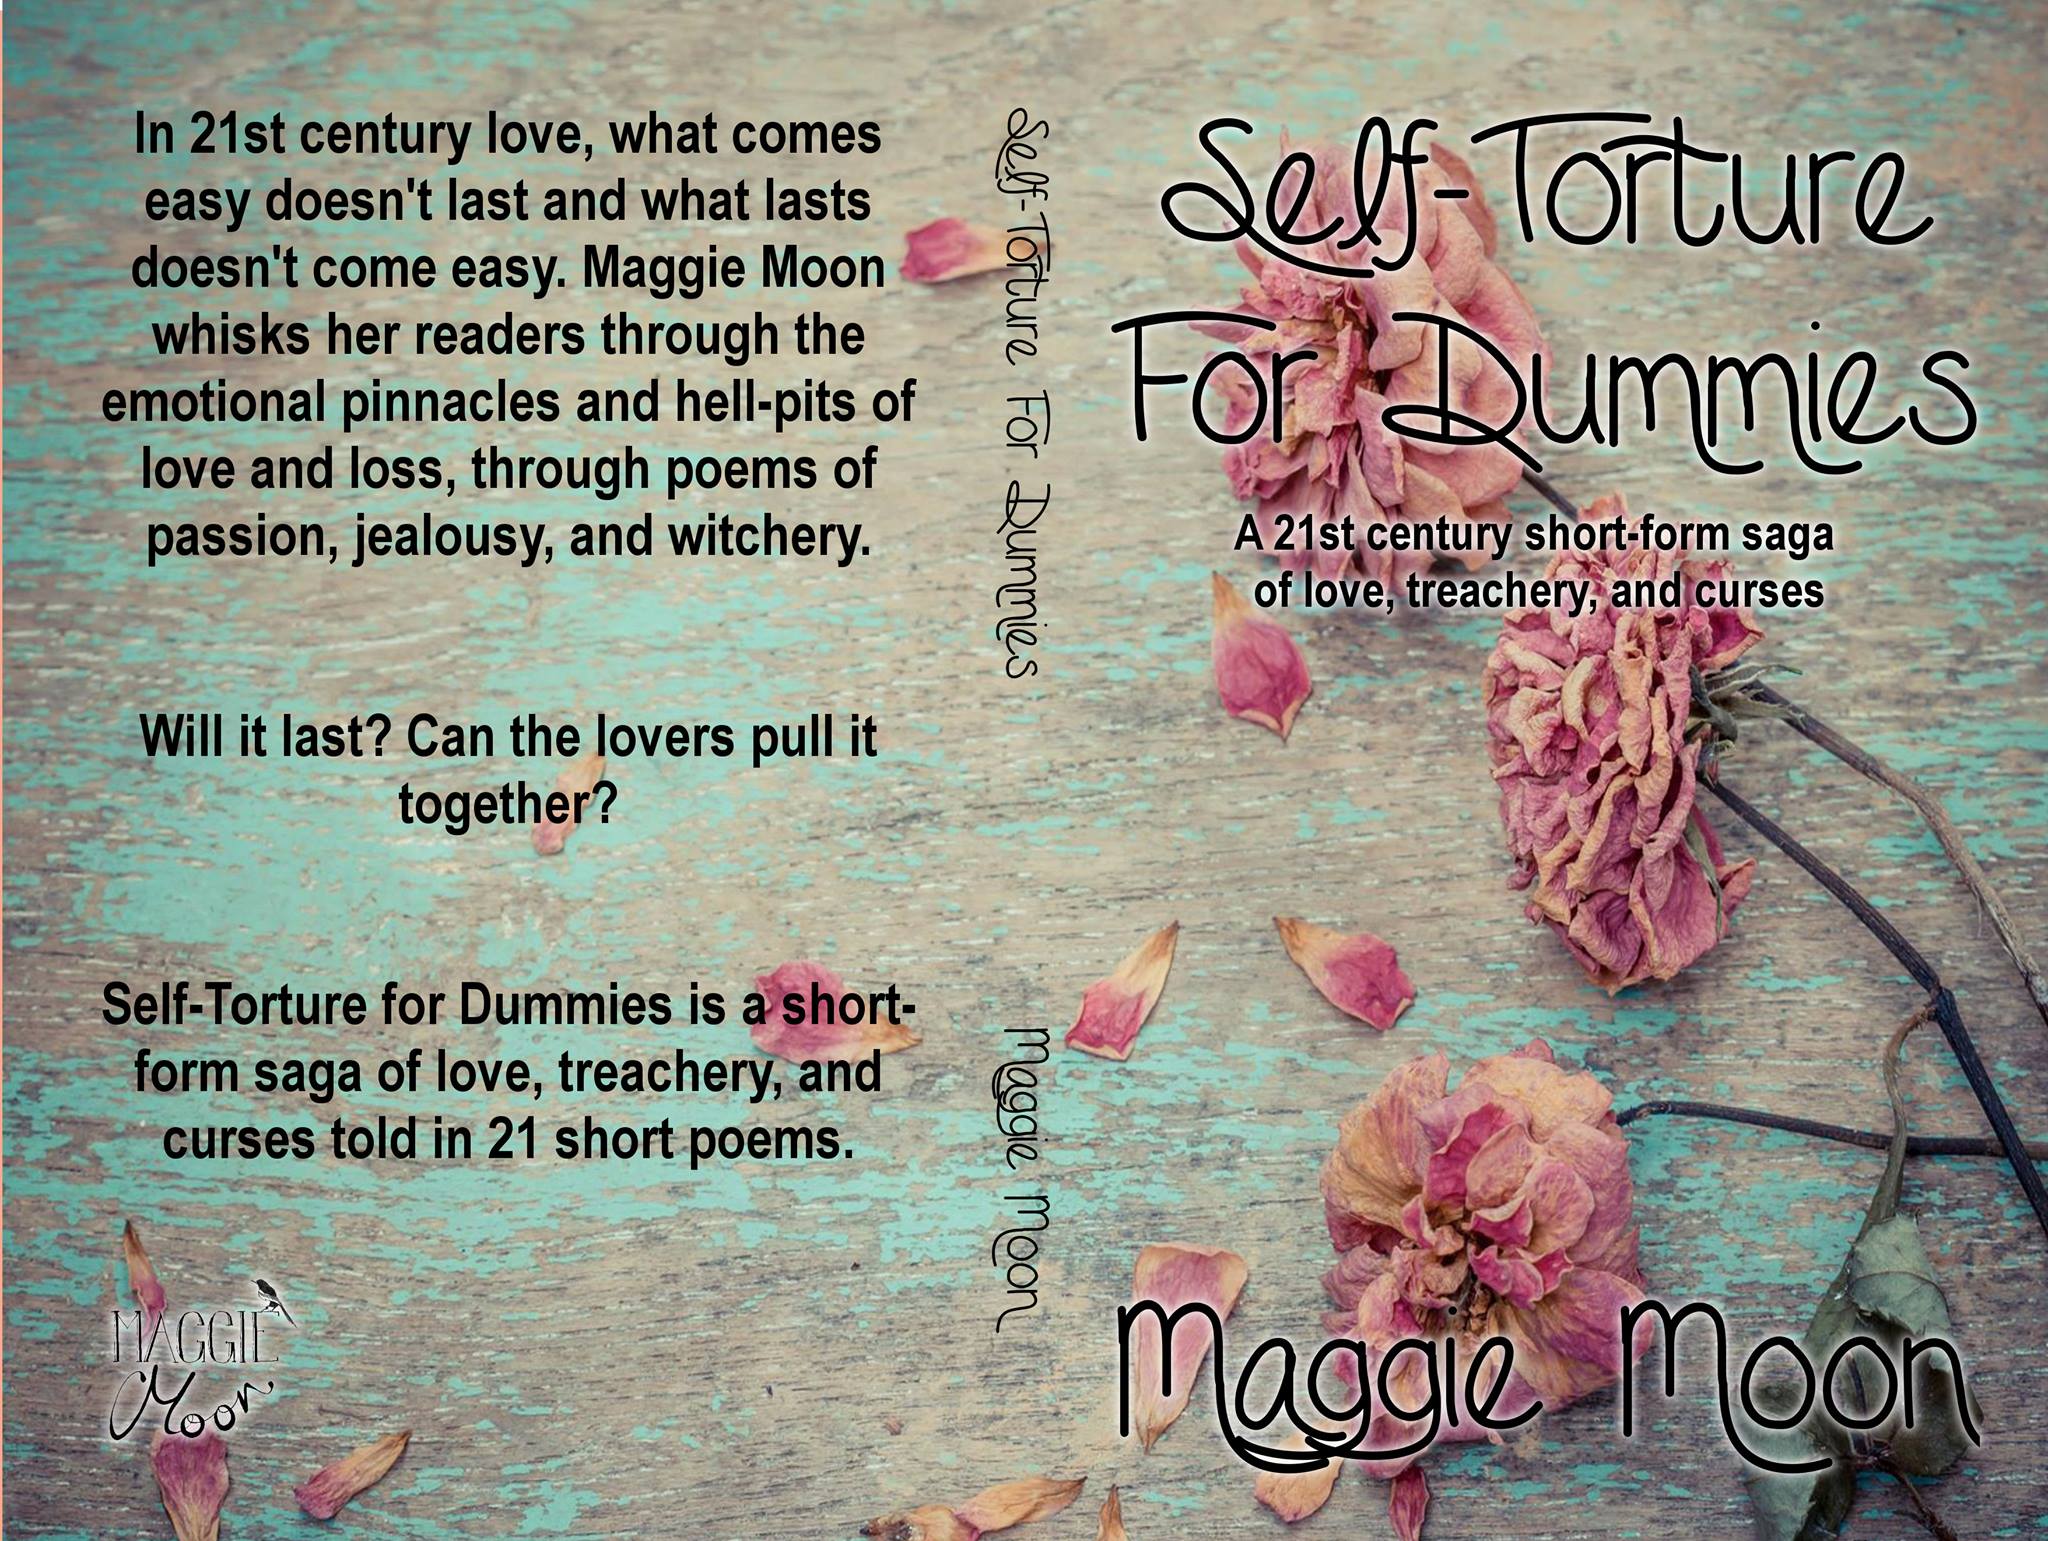 Self-Torture for Dummies by Maggie Moon